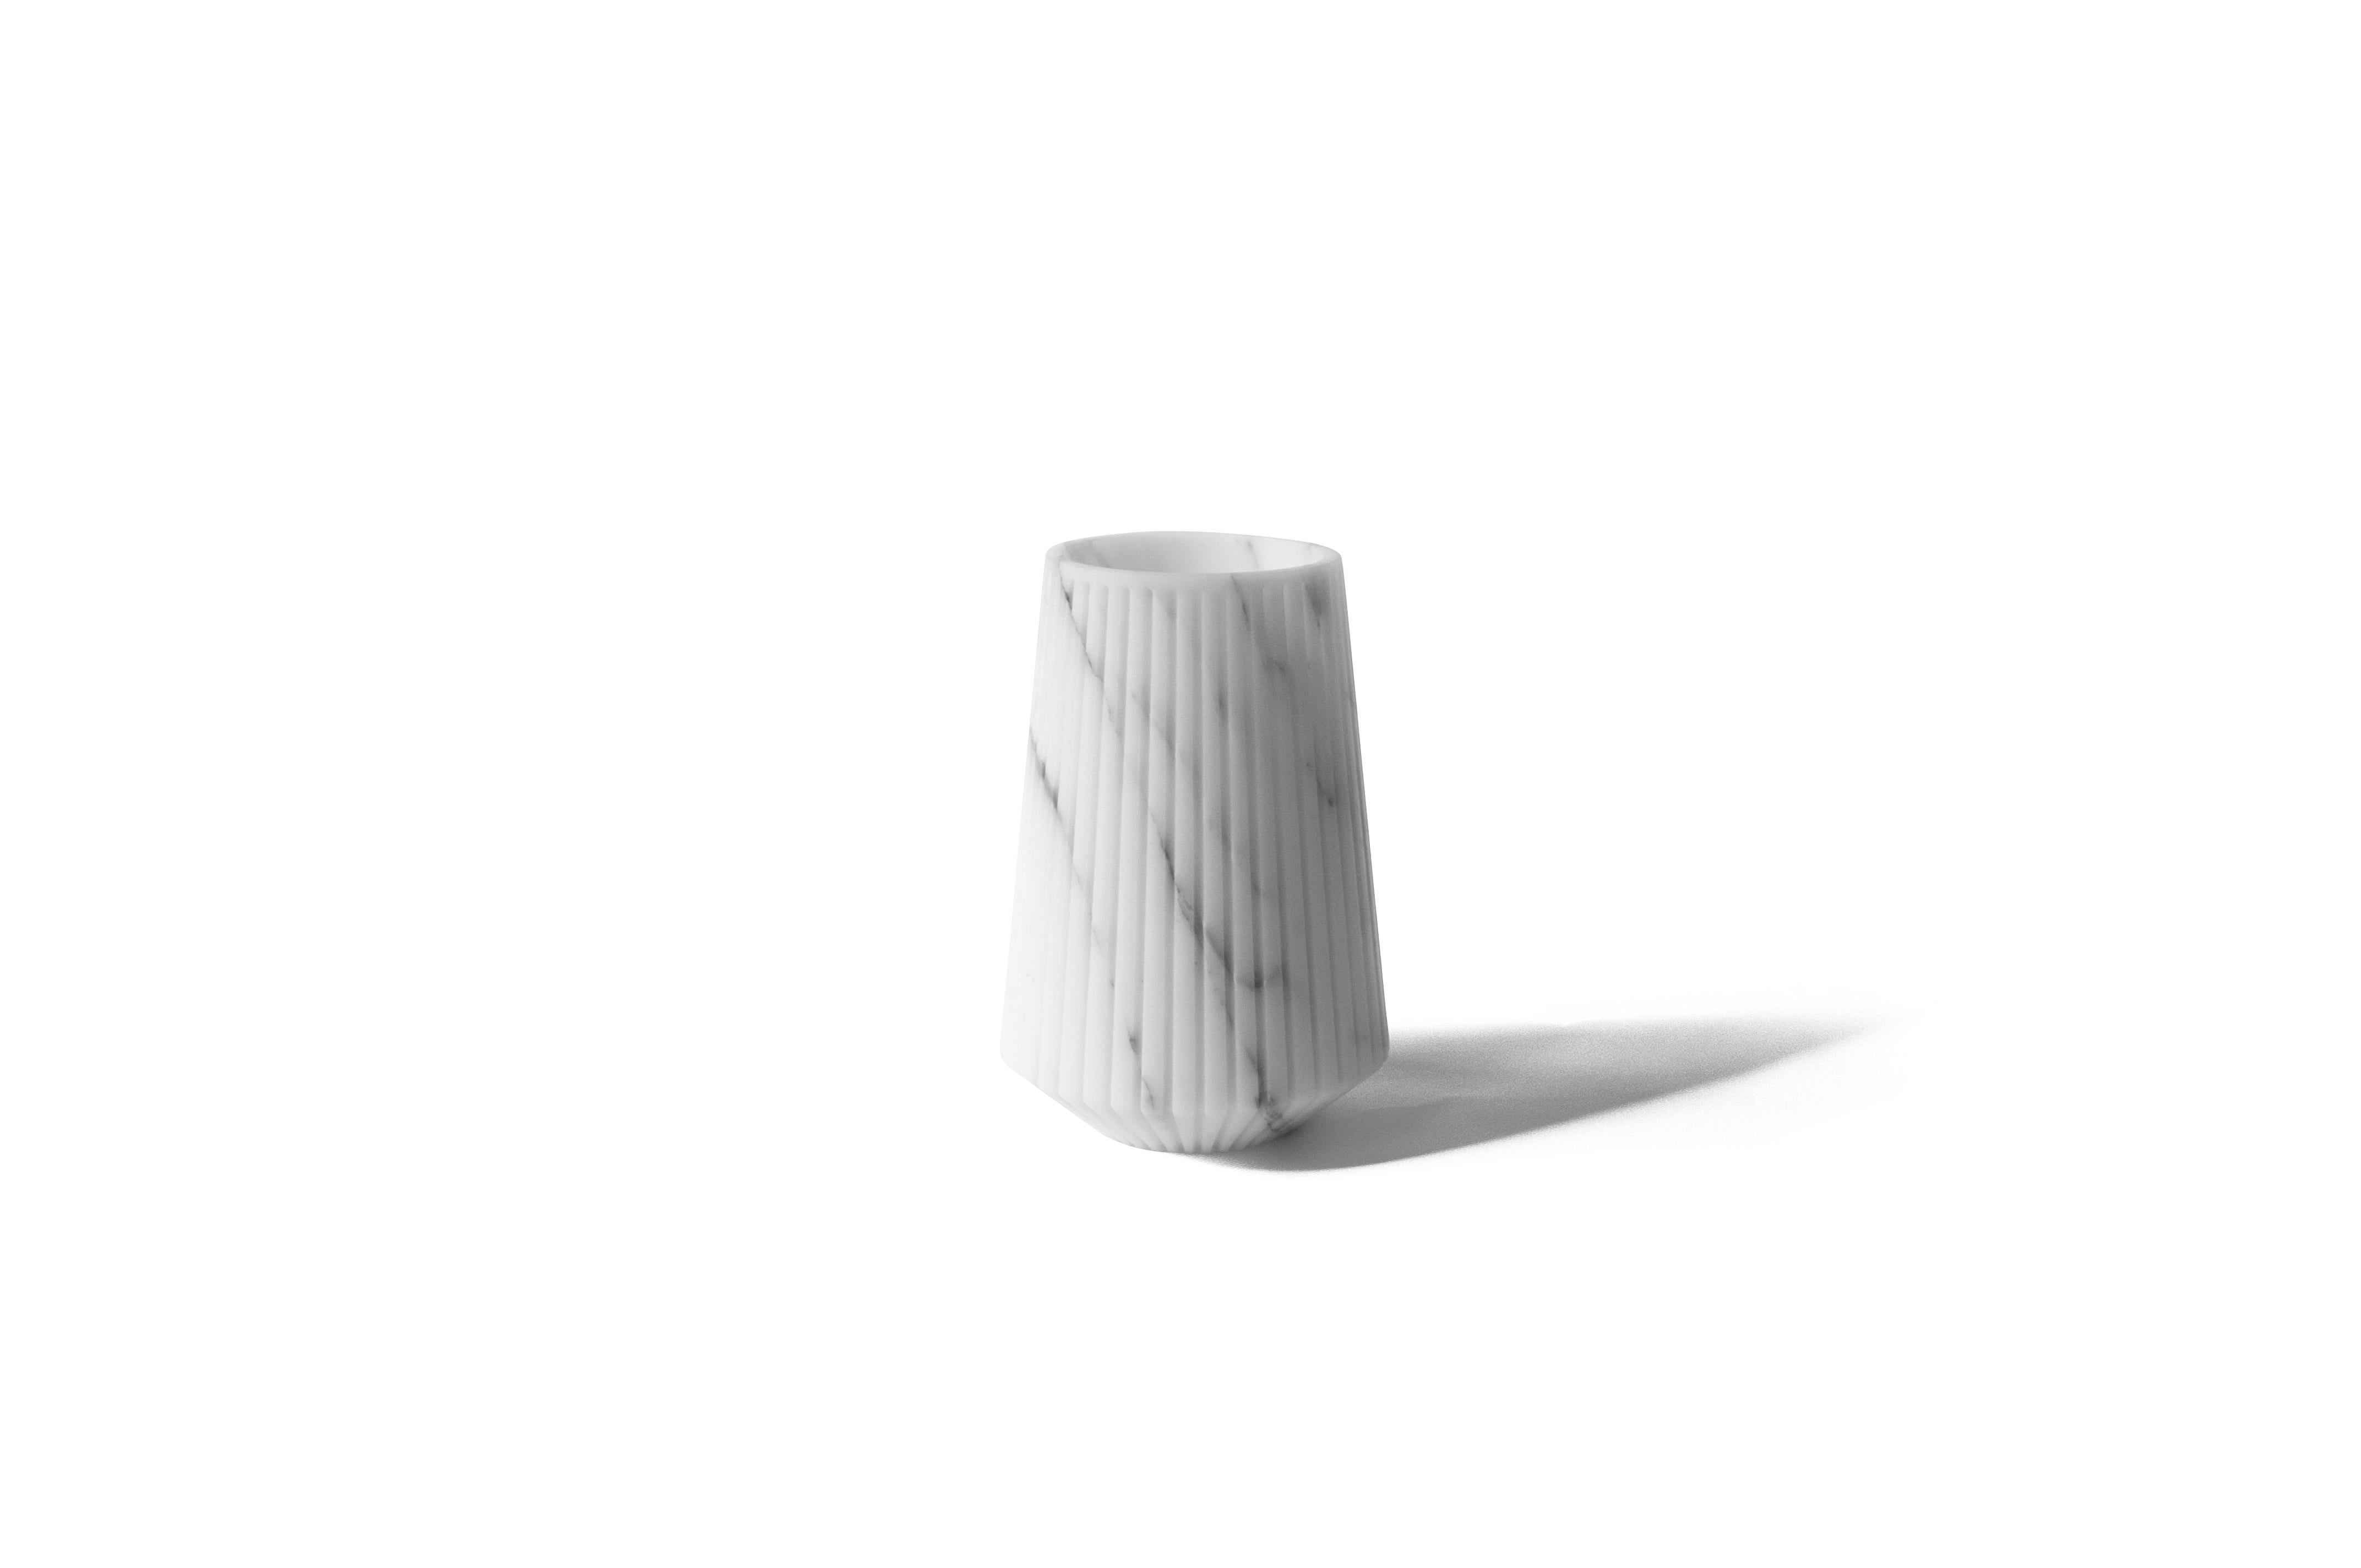 Striped medium vase in white Carrara marble.
-Jacopo Simonetti design for FiammettaV-
Each piece is in a way unique (every marble block is different in veins and shades) and handmade by Italian artisans specialized over generations in processing